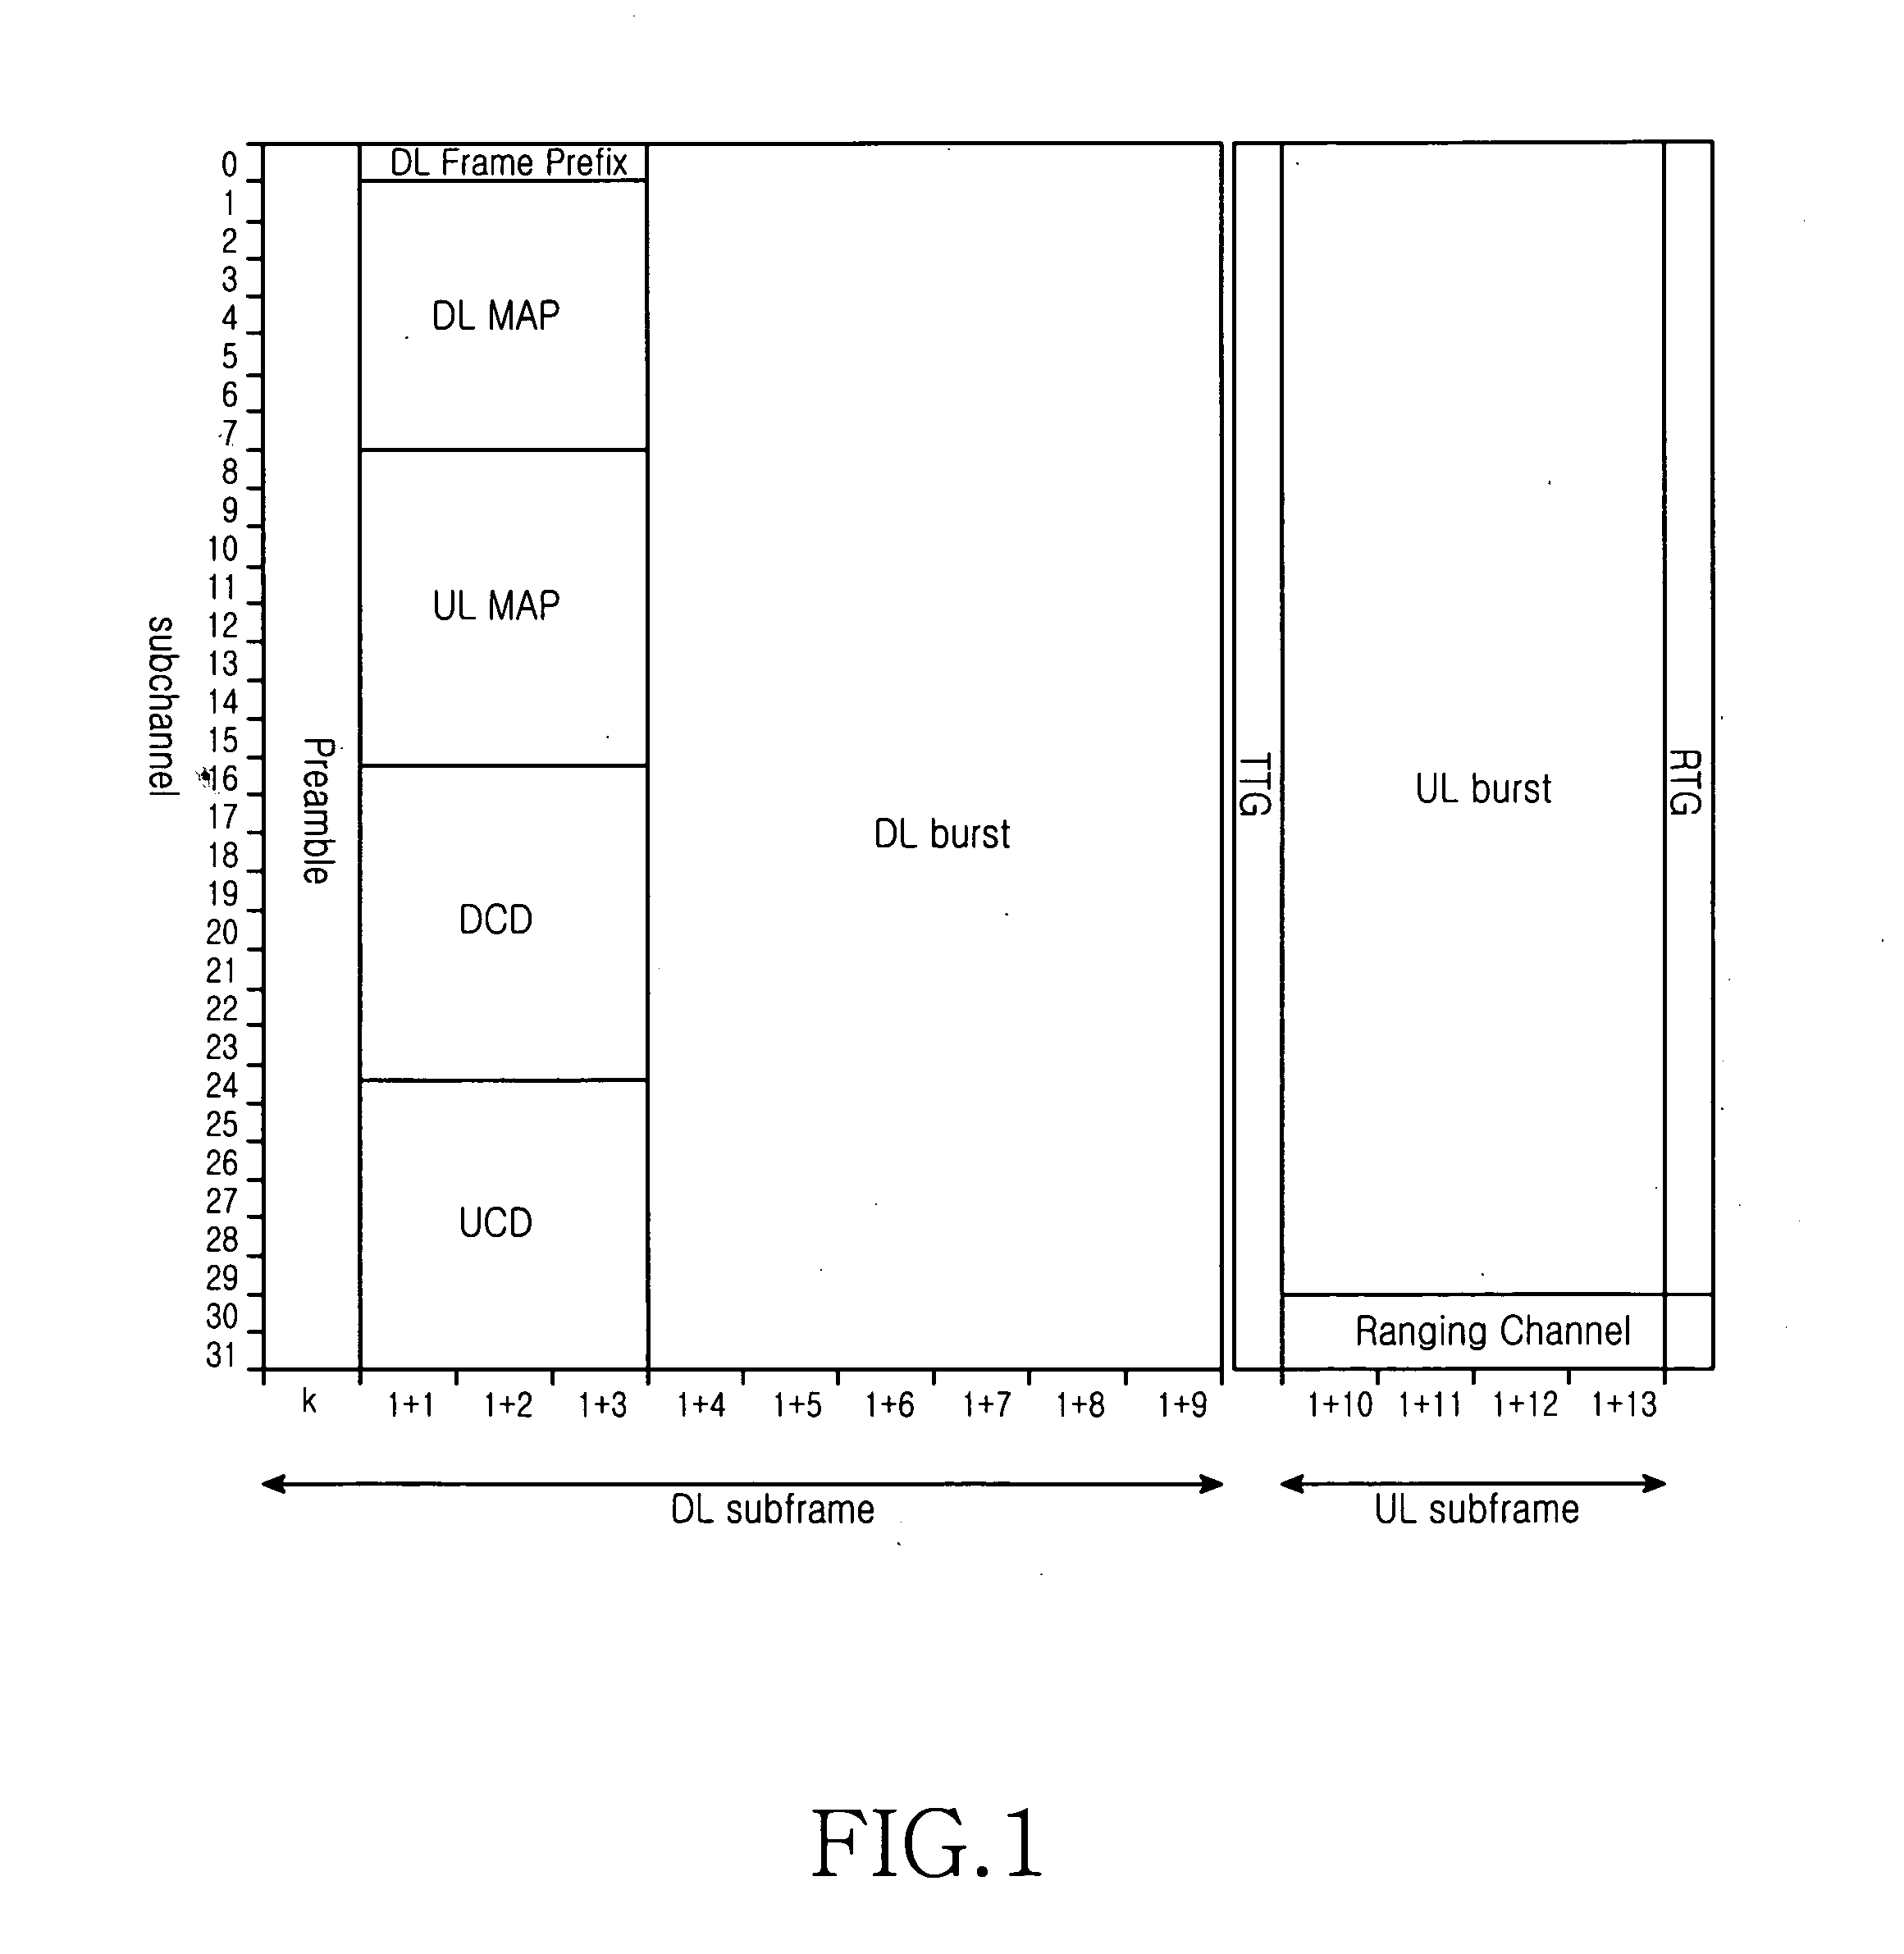 Method for generating and transmitting a control message in a broadband wireless access communication system